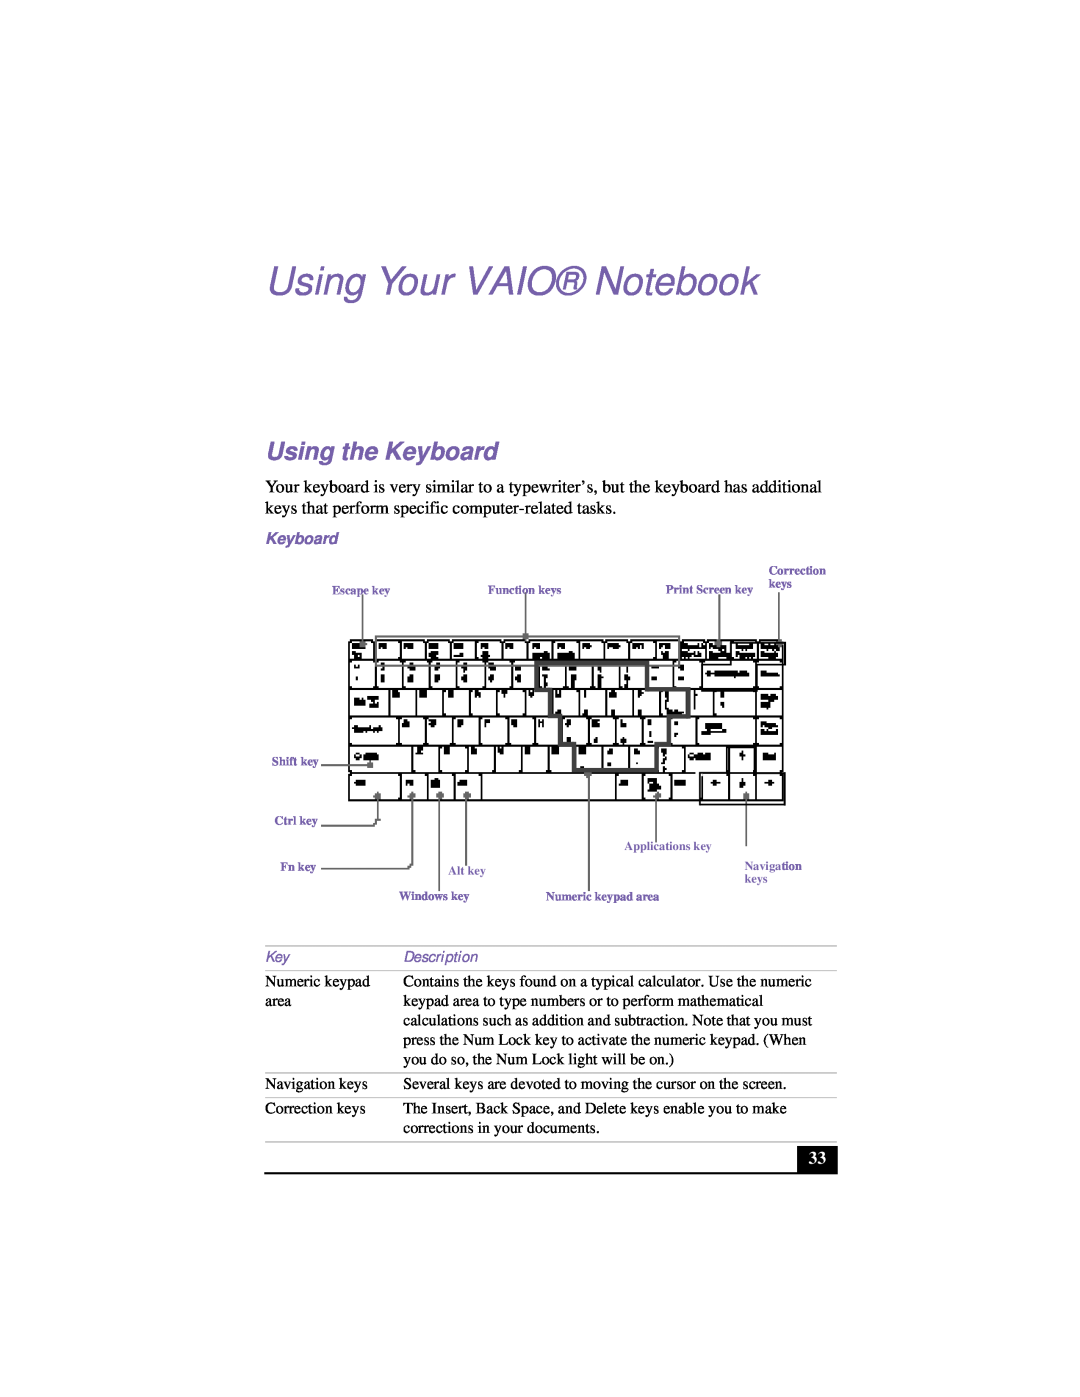 Sony PCG-FX120 manual Using Your VAIO Notebook, Using the Keyboard, Description 